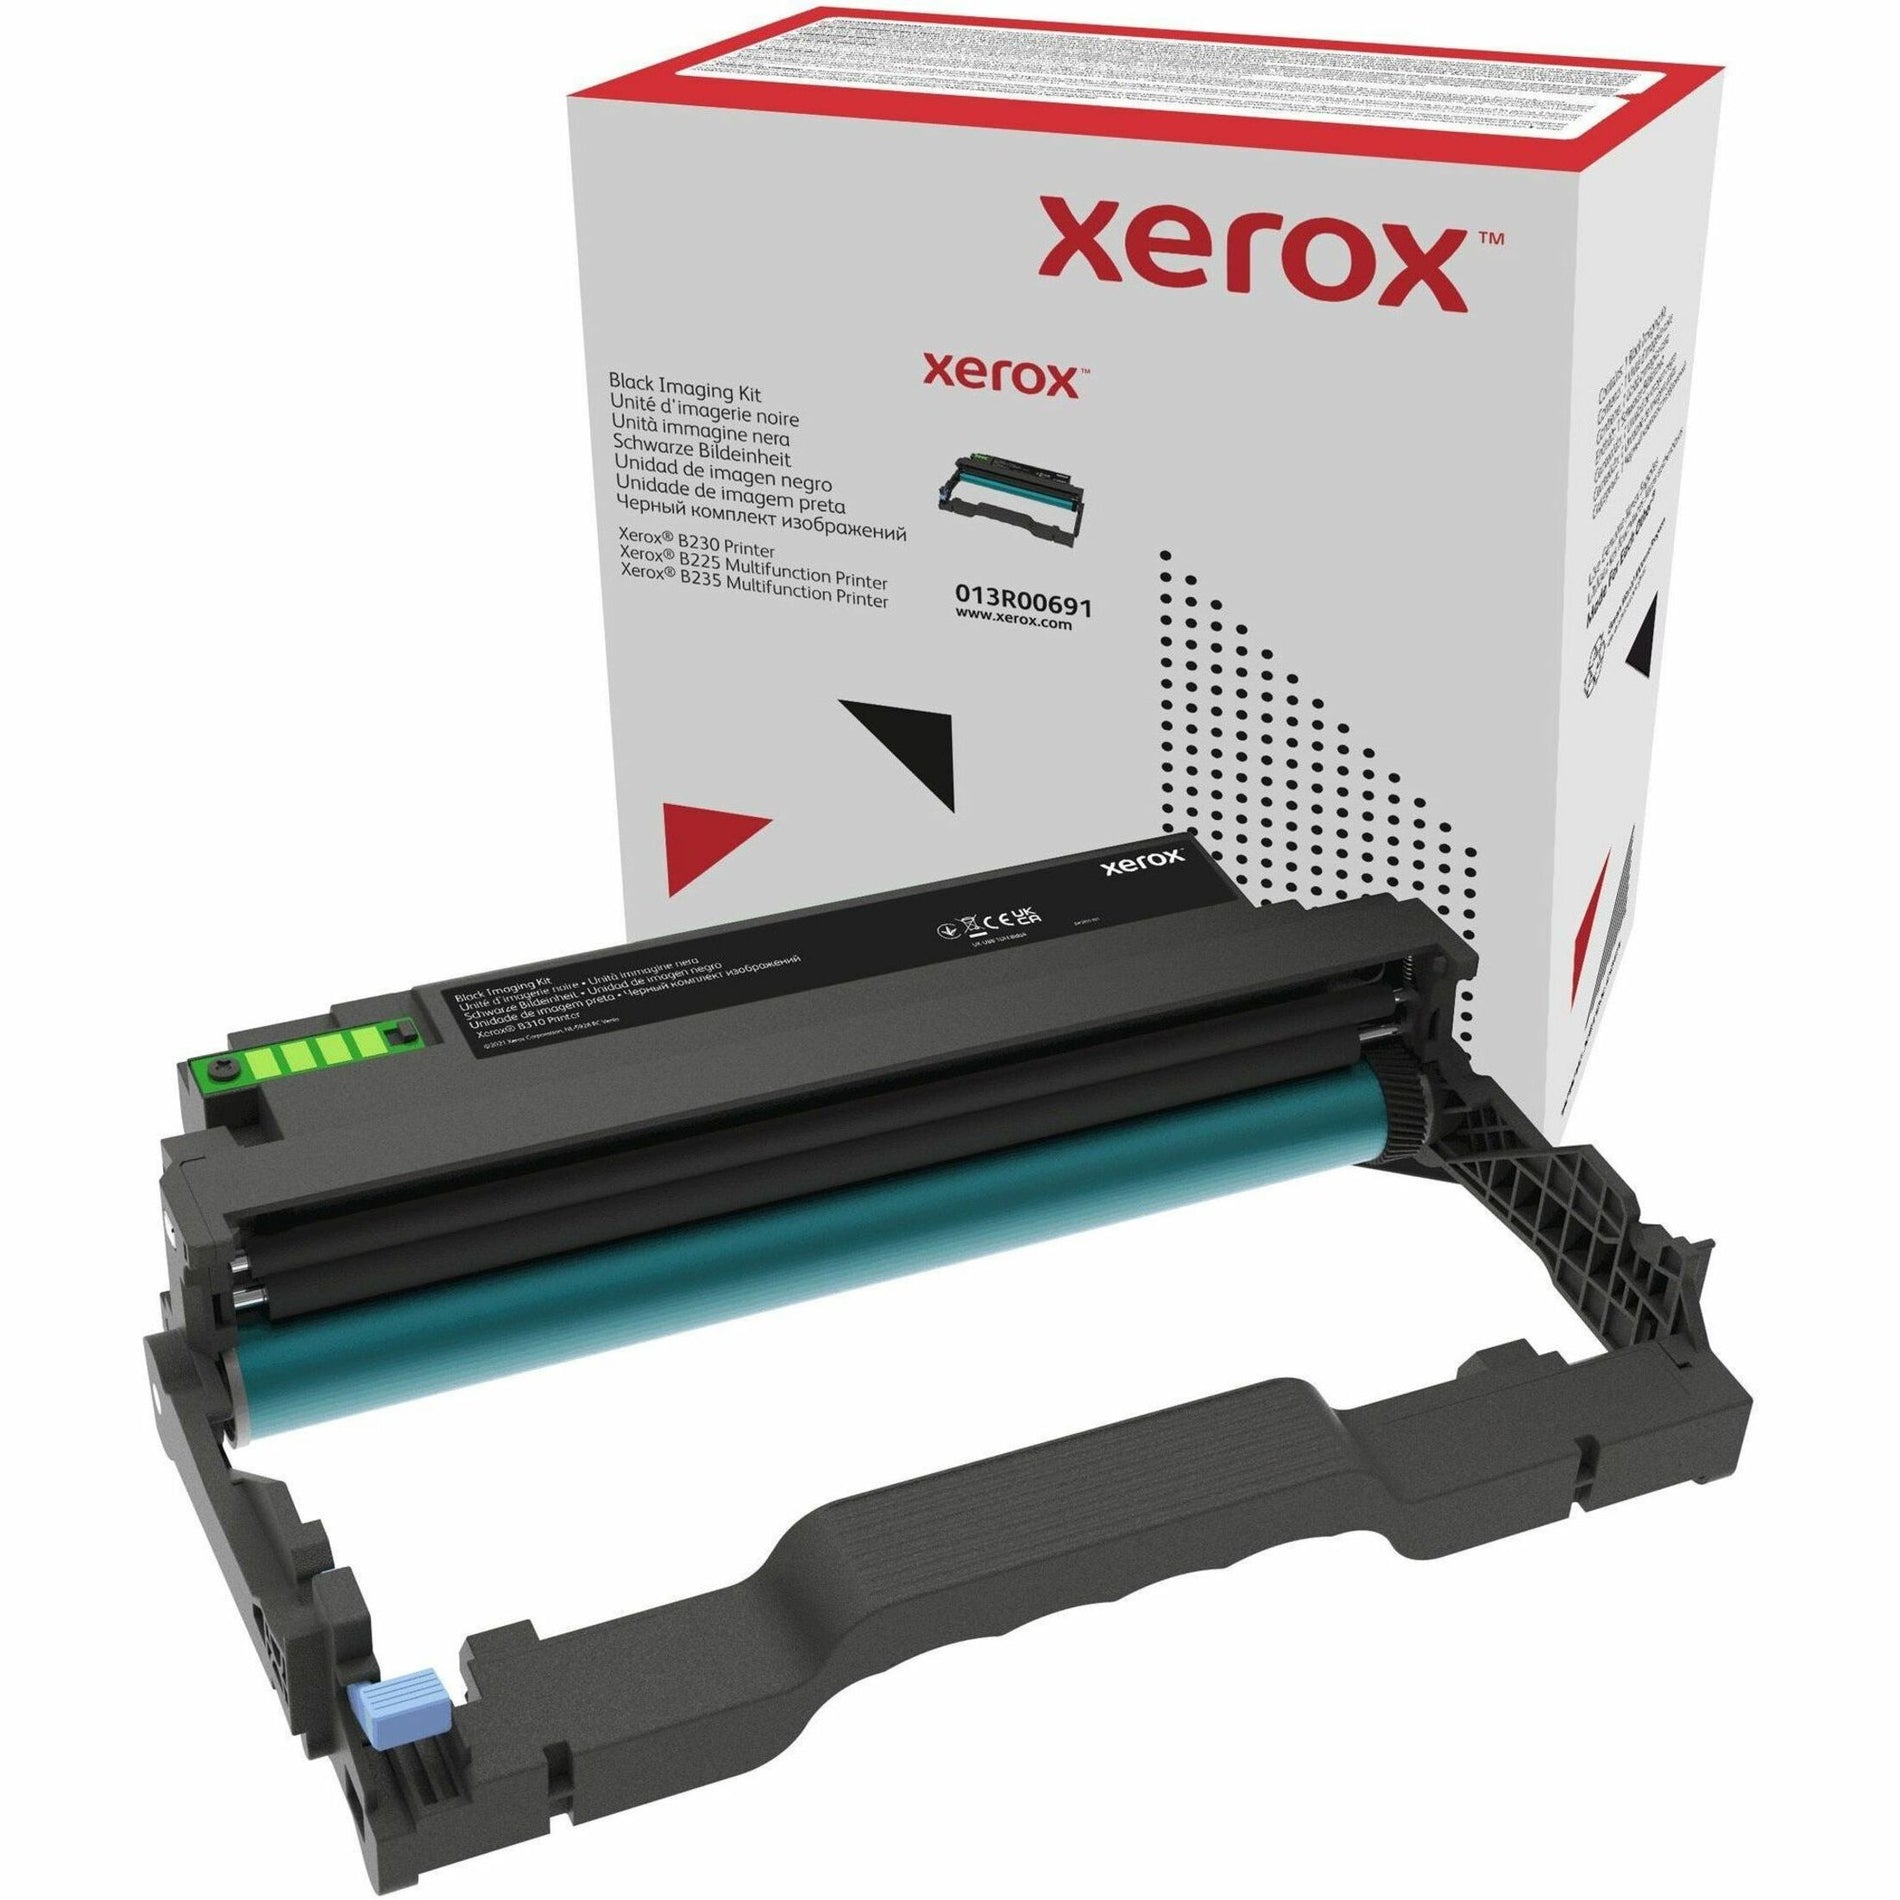 Xerox 013R00691 Imaging Drum - Laser Print Technology, 12000 Pages